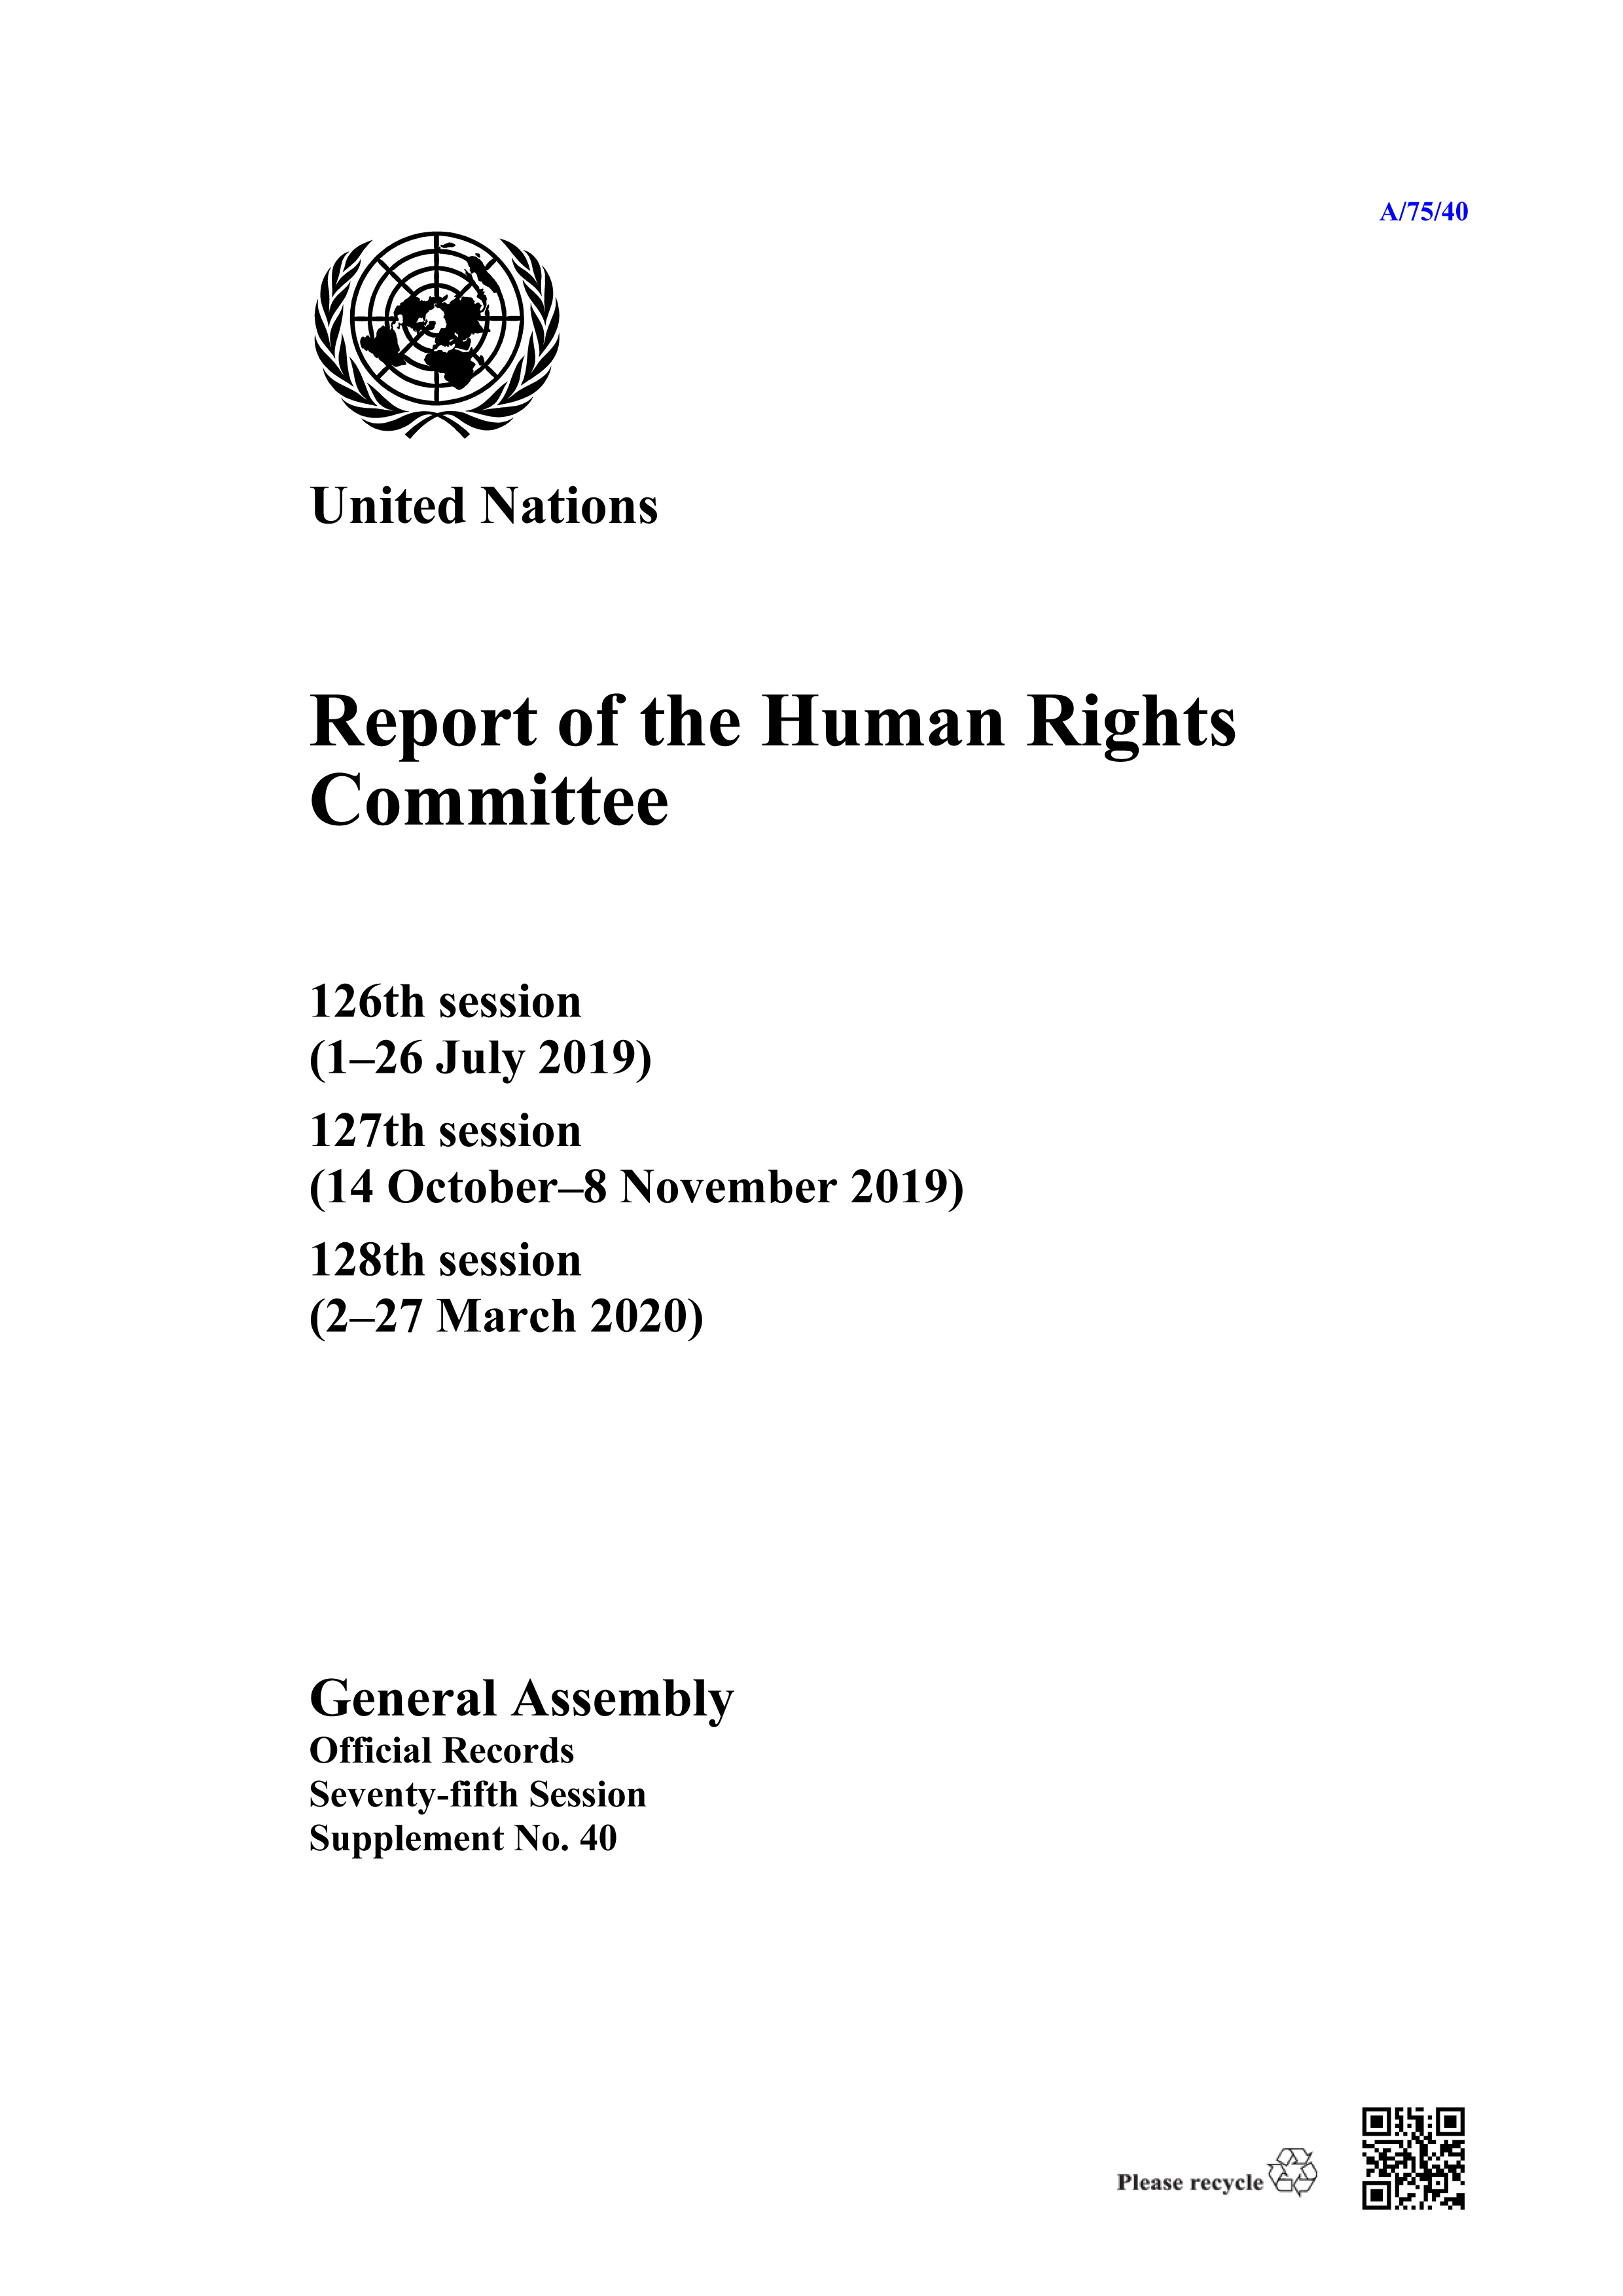 image of Report of the Human Rights Committee